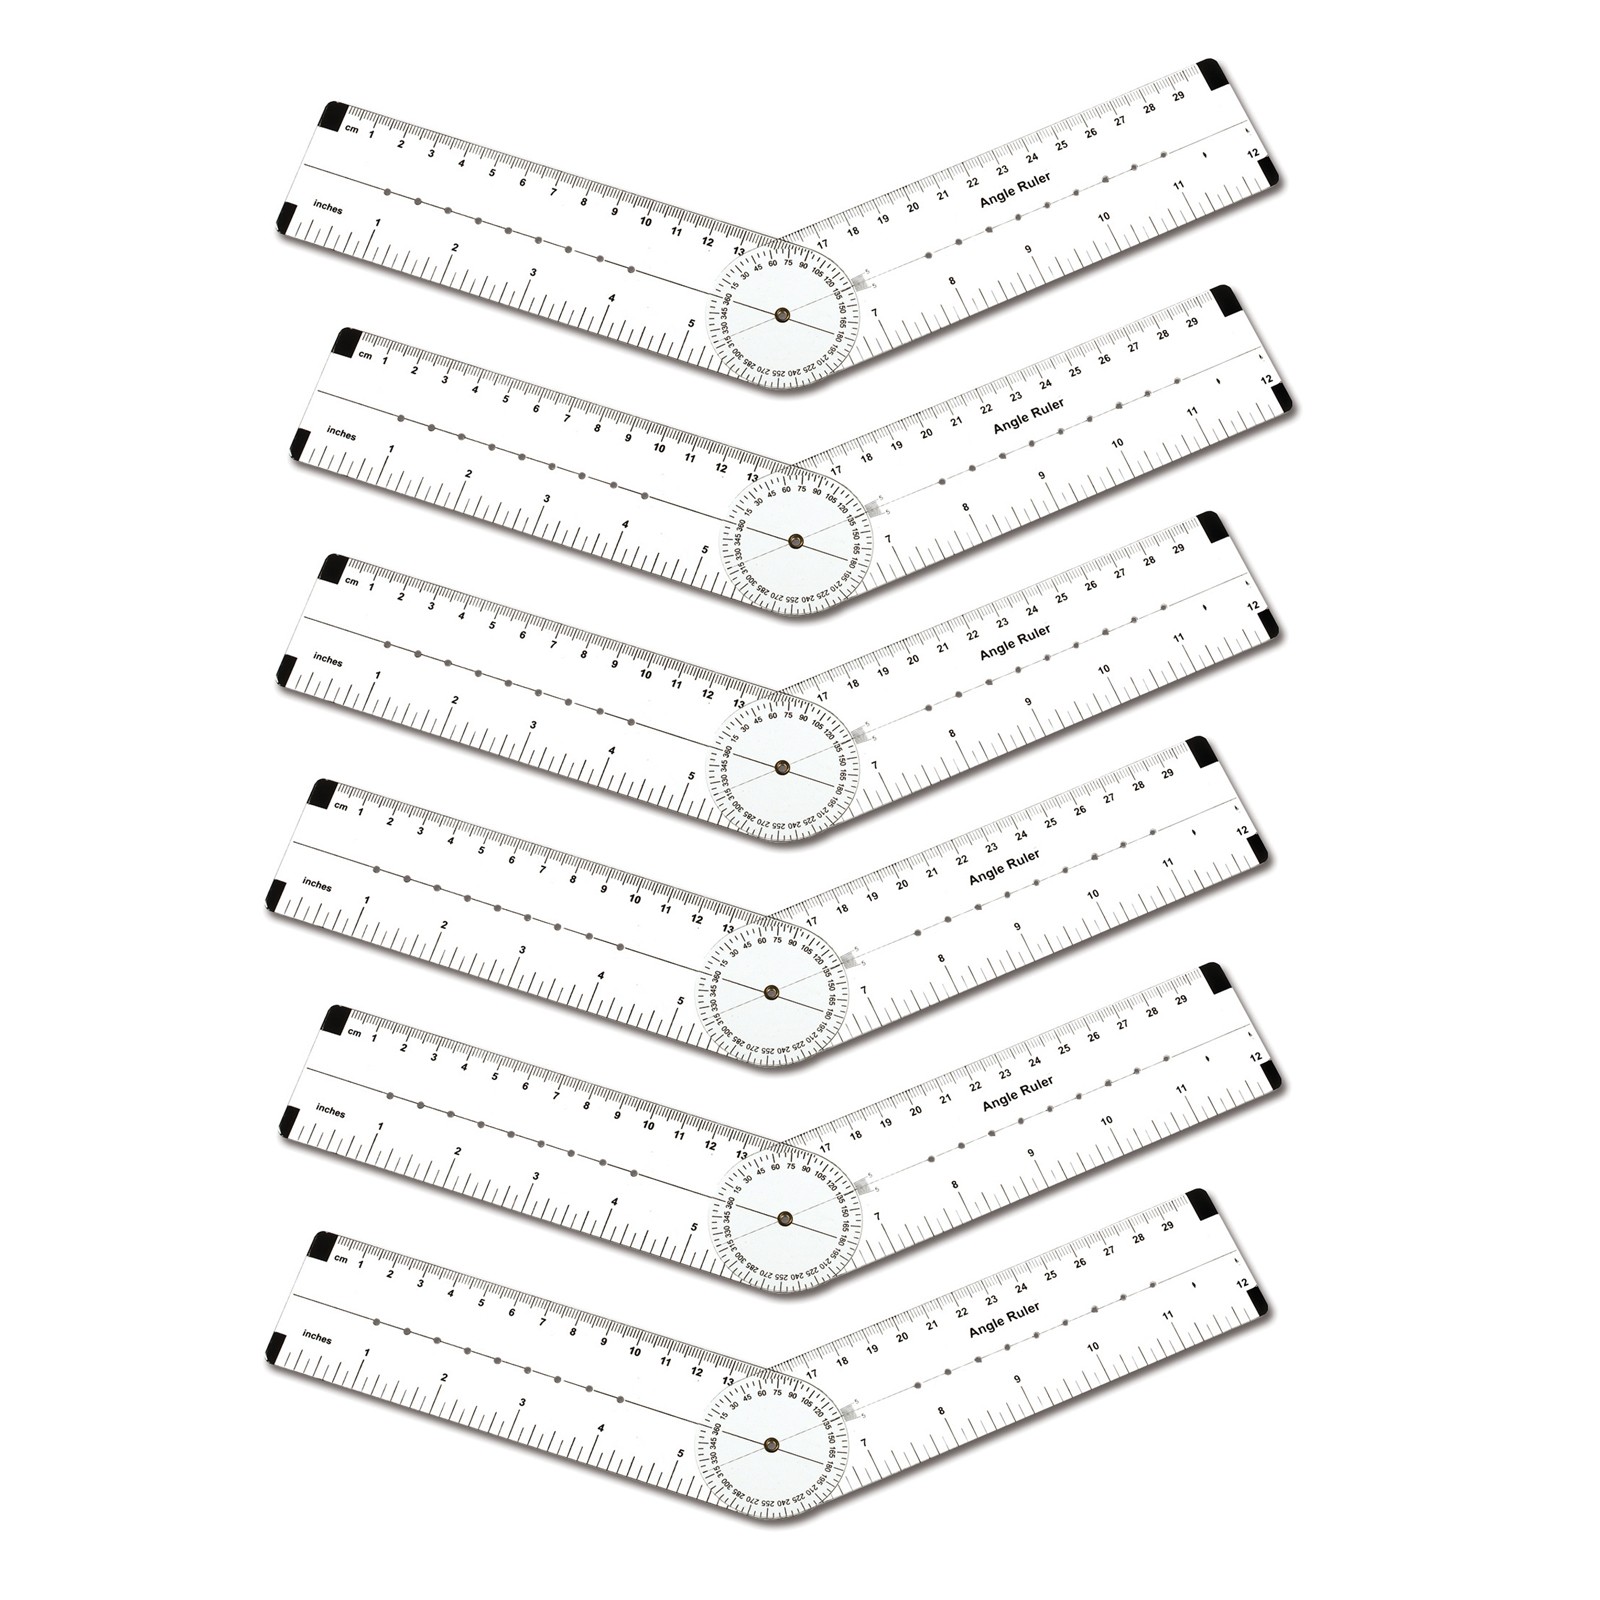 Angle Measurement Ruler, Pack of 6